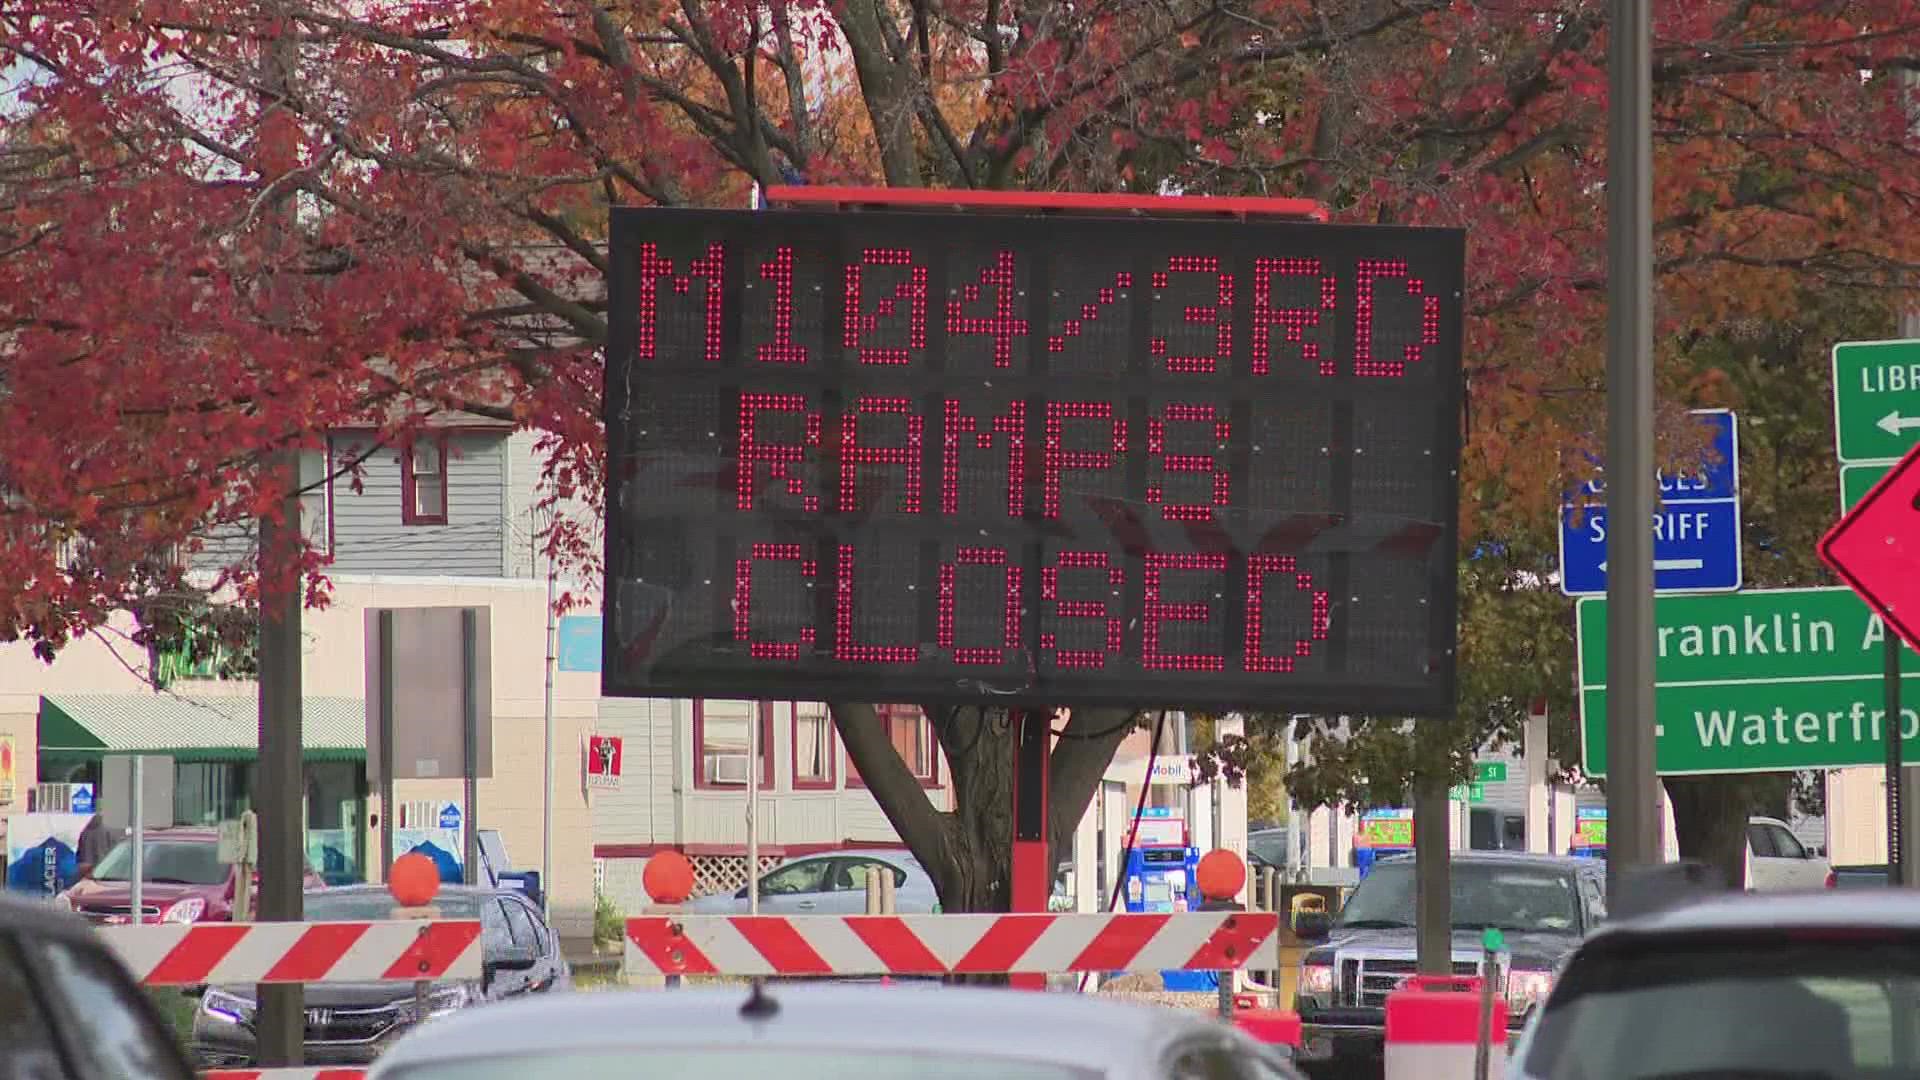 MDOT is telling drivers to expect long backups for anyone traveling northbound, and to add 30 minutes to their morning and afternoon commute times.